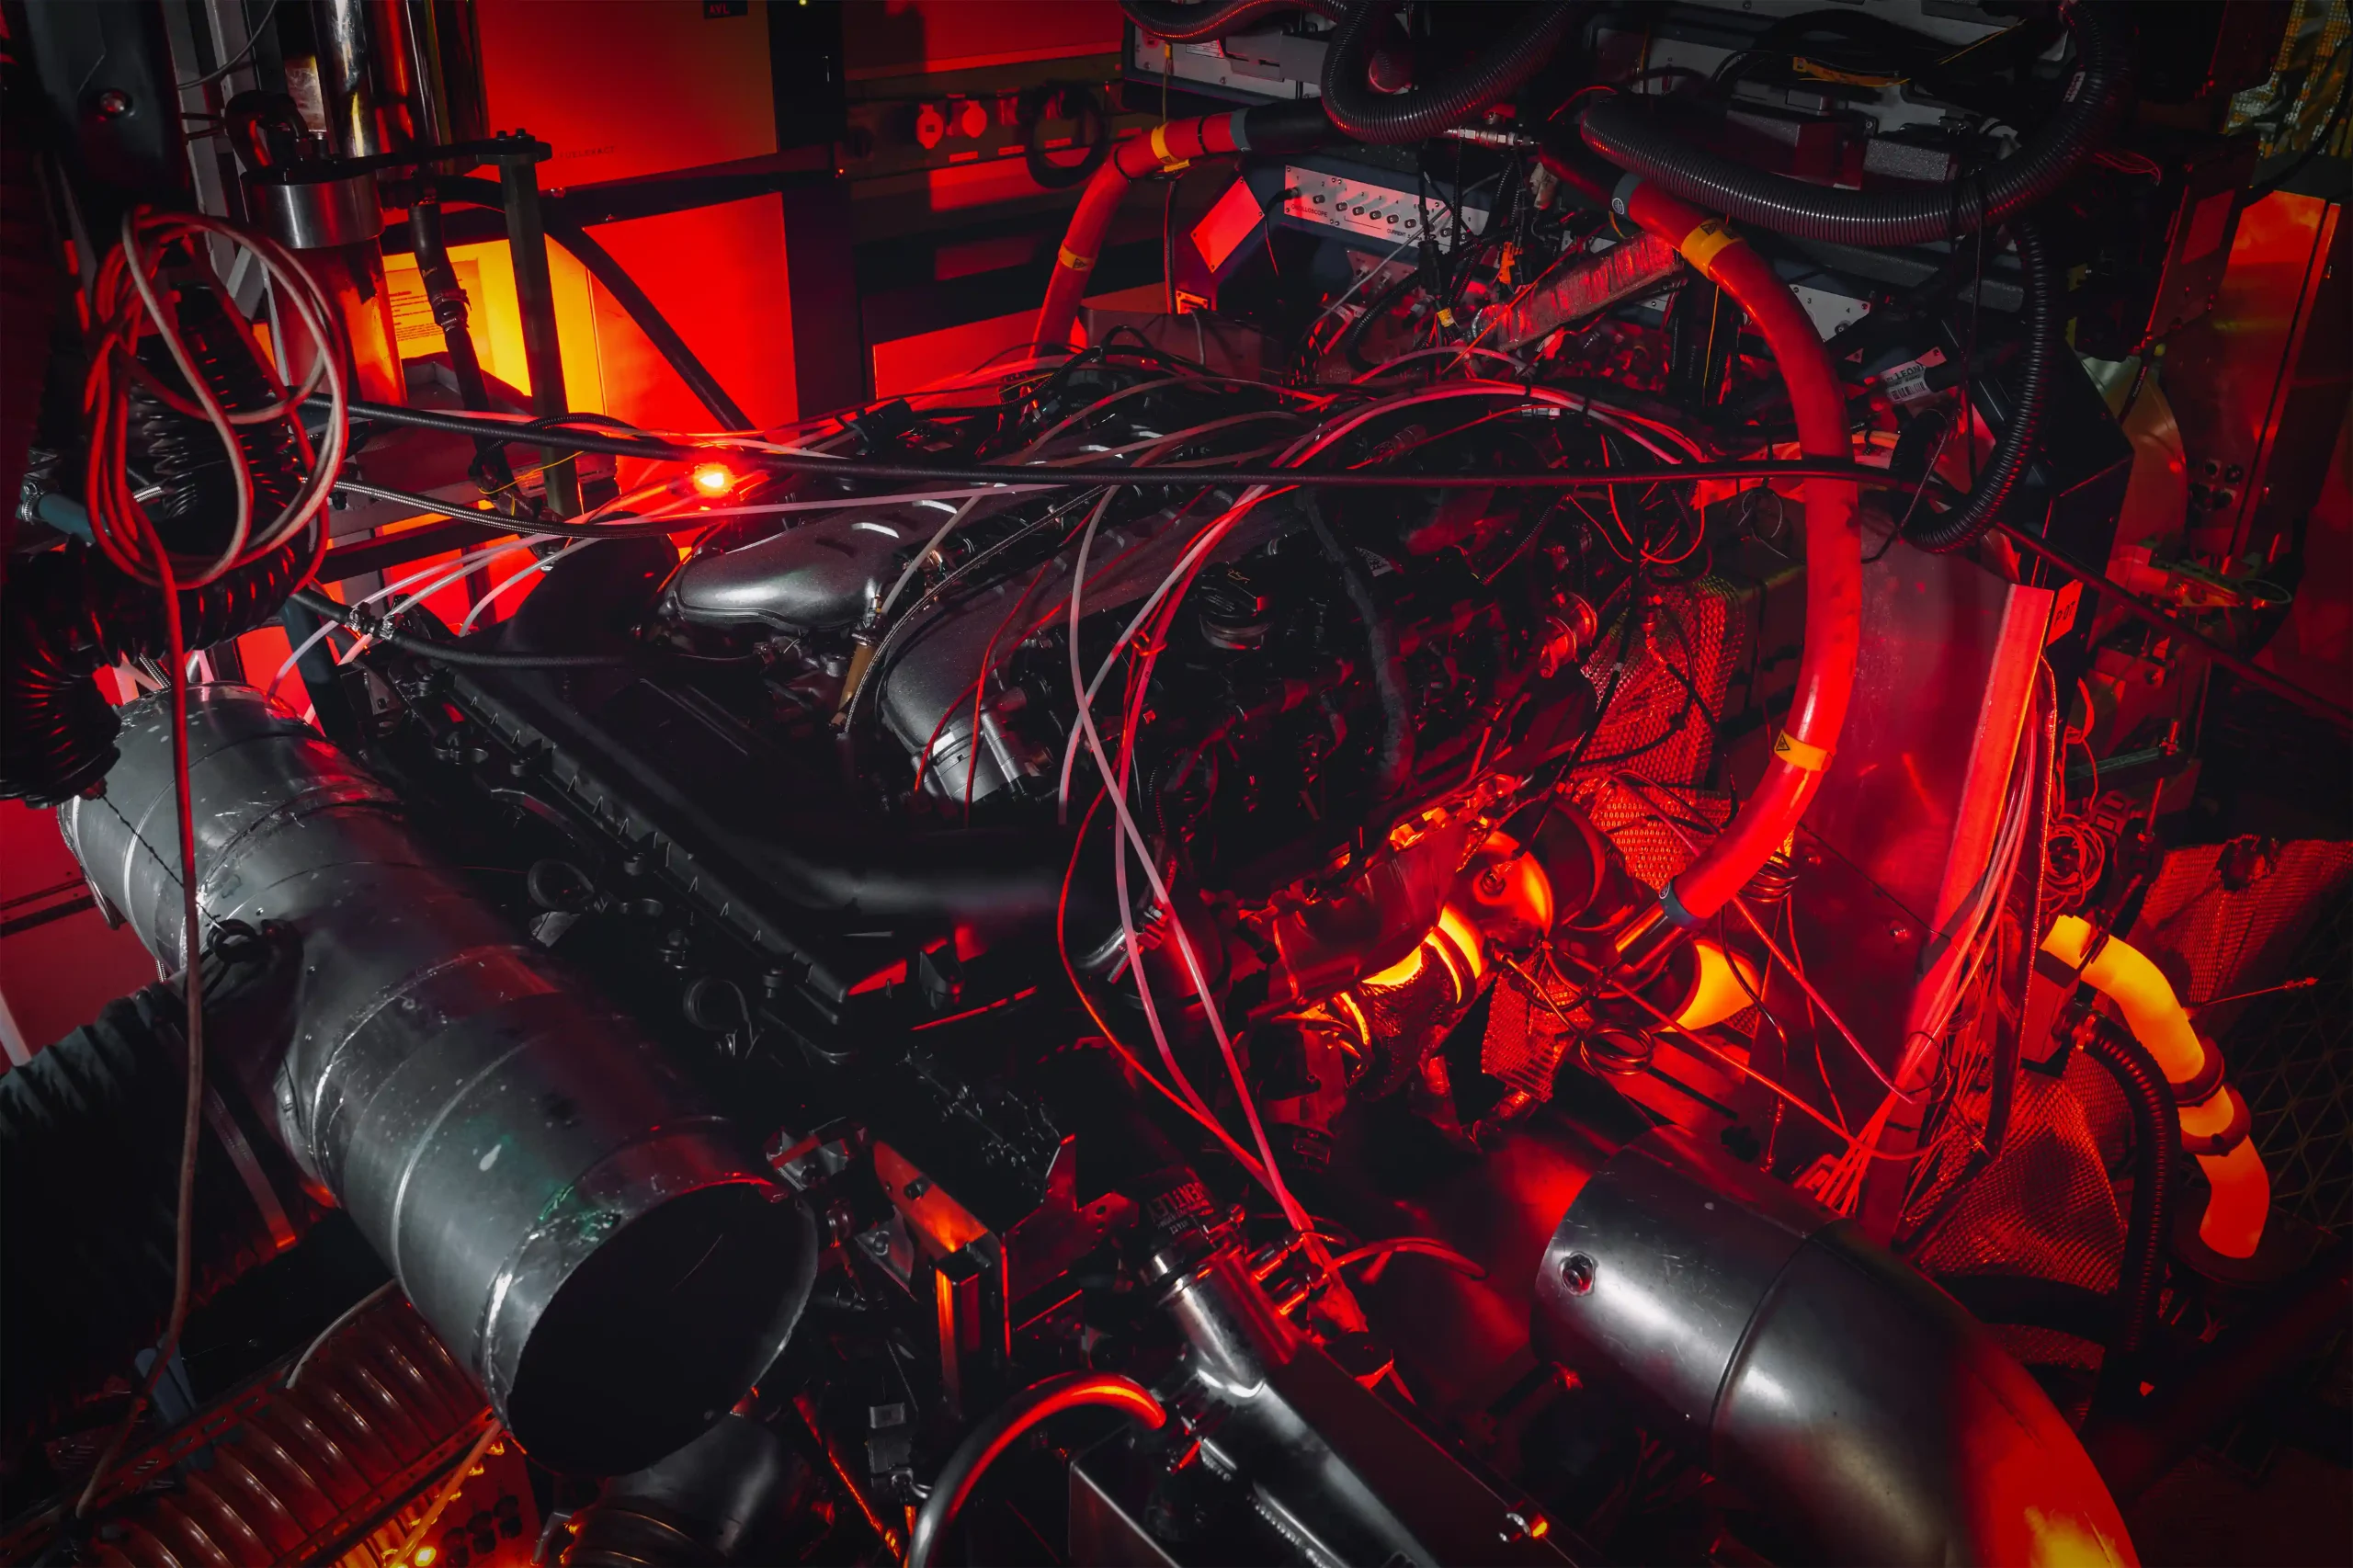 BENTLEY ANNOUNCES END TO 12-CYLINDER ENGINE PRODUCTION WITH THE MOST POWERFUL VERSION EVER © Copyright PLPG GLOBAL MEDIA 2023